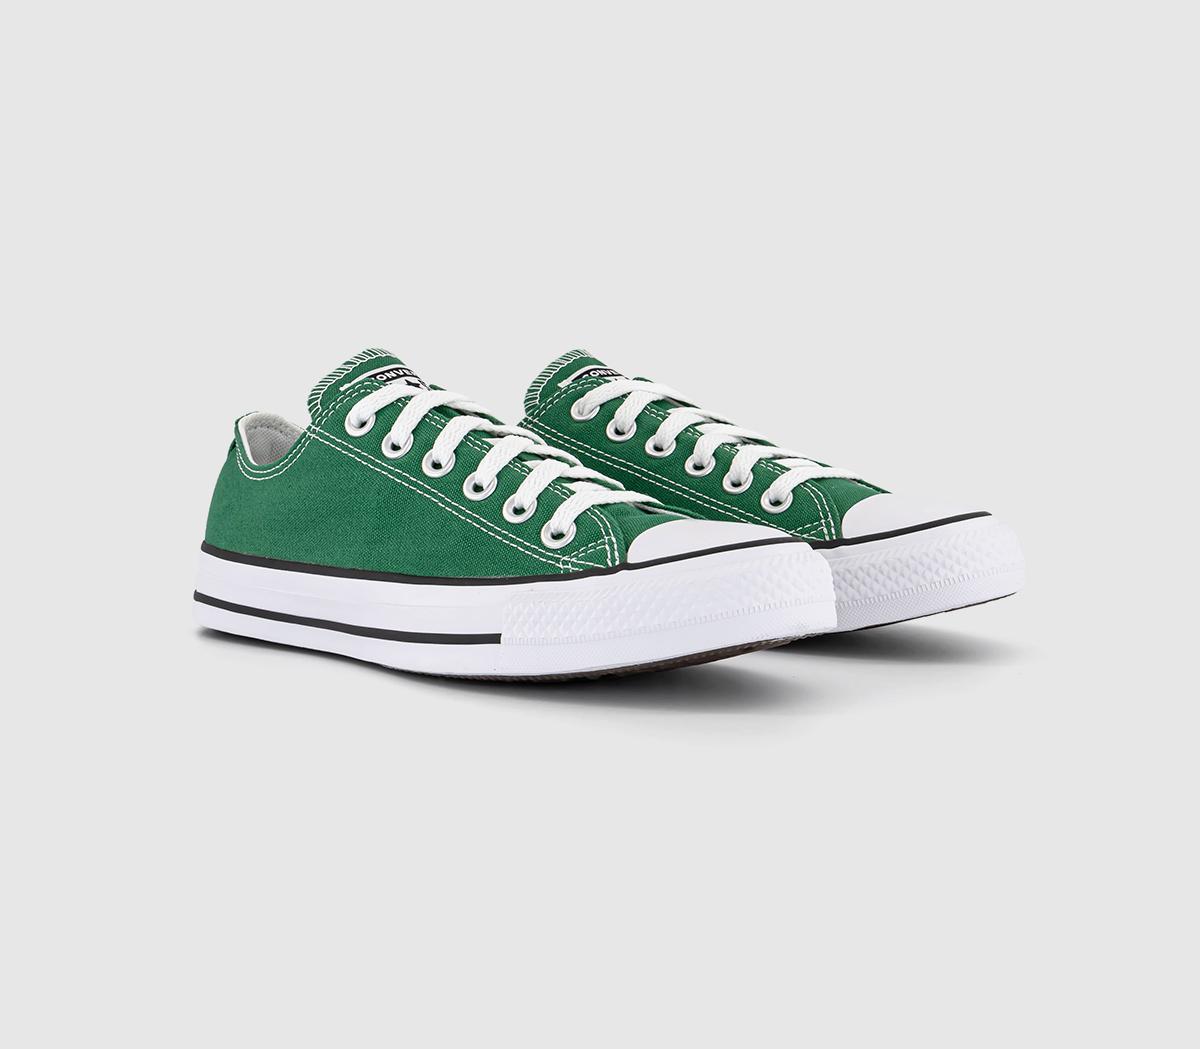 Converse All Star Low Trainers Amazon Green, 8